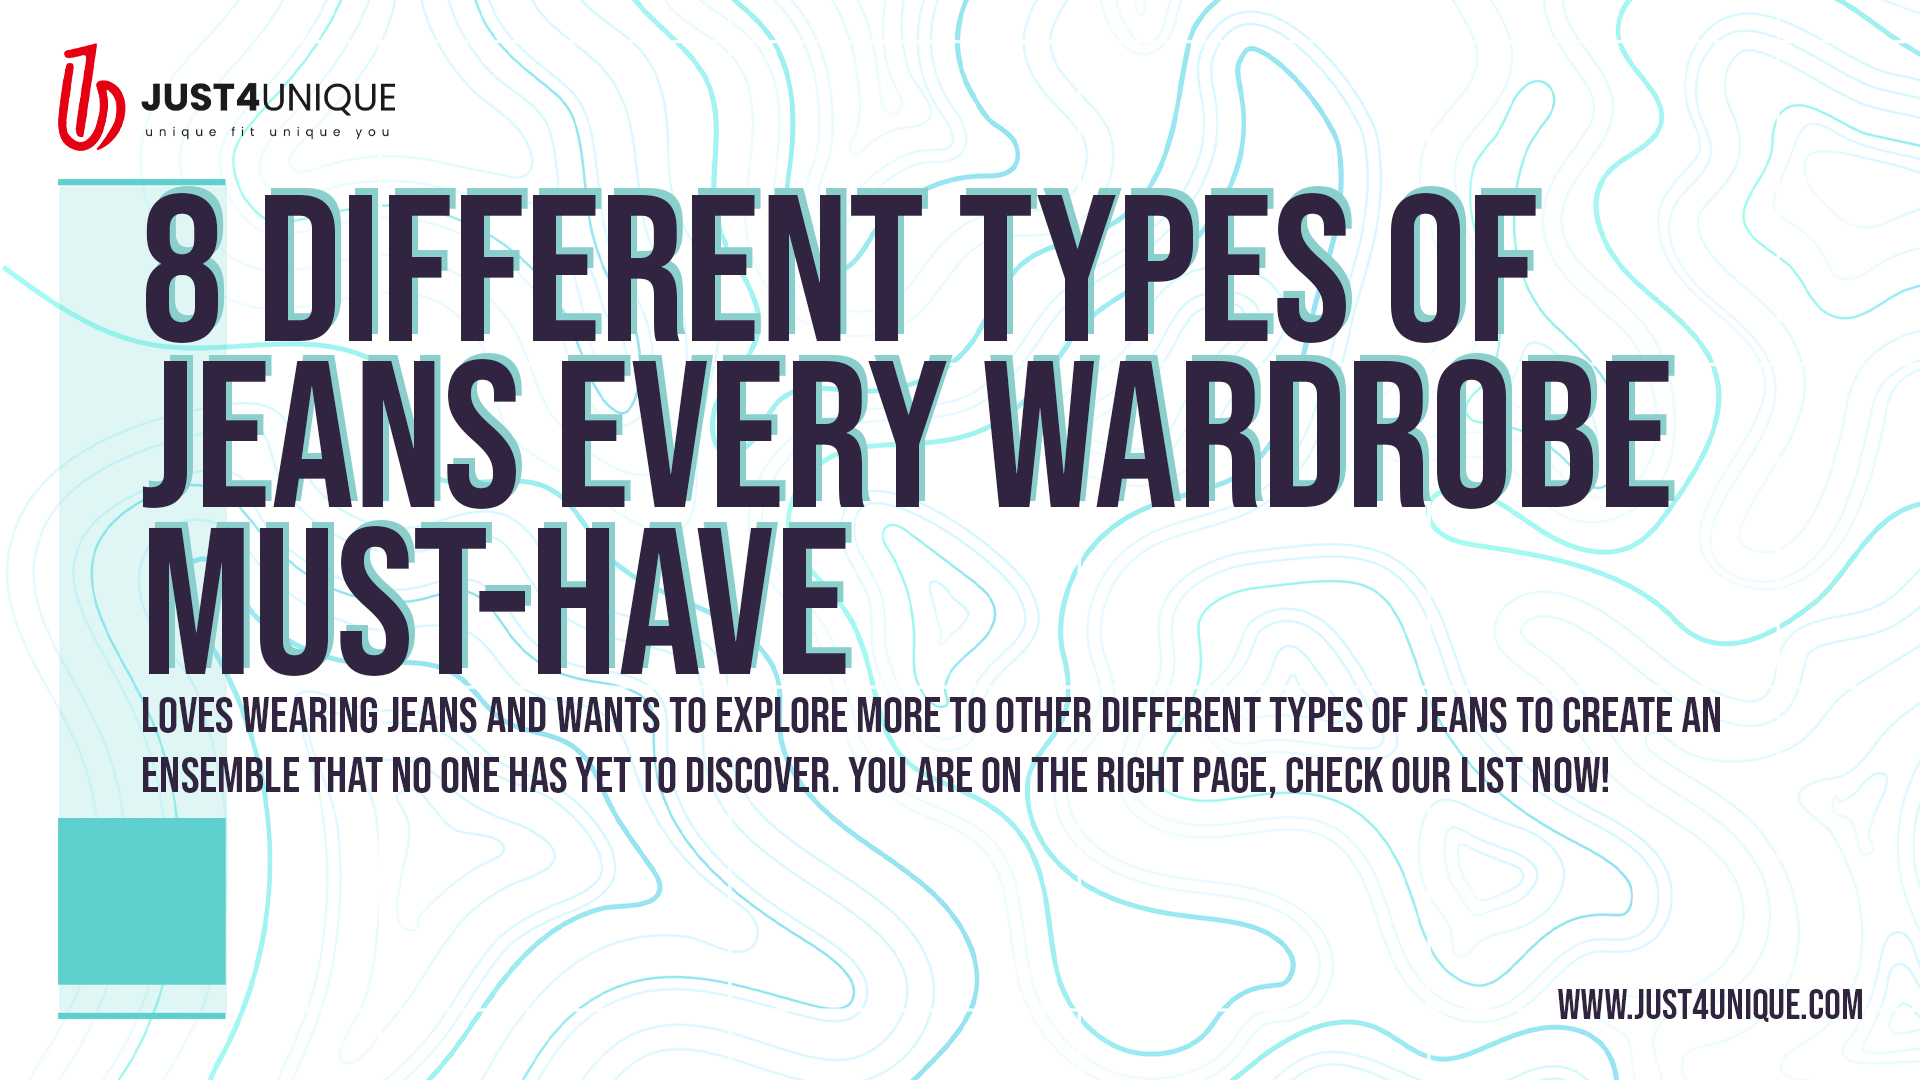 8 Different Types of Jeans Every Wardrobe